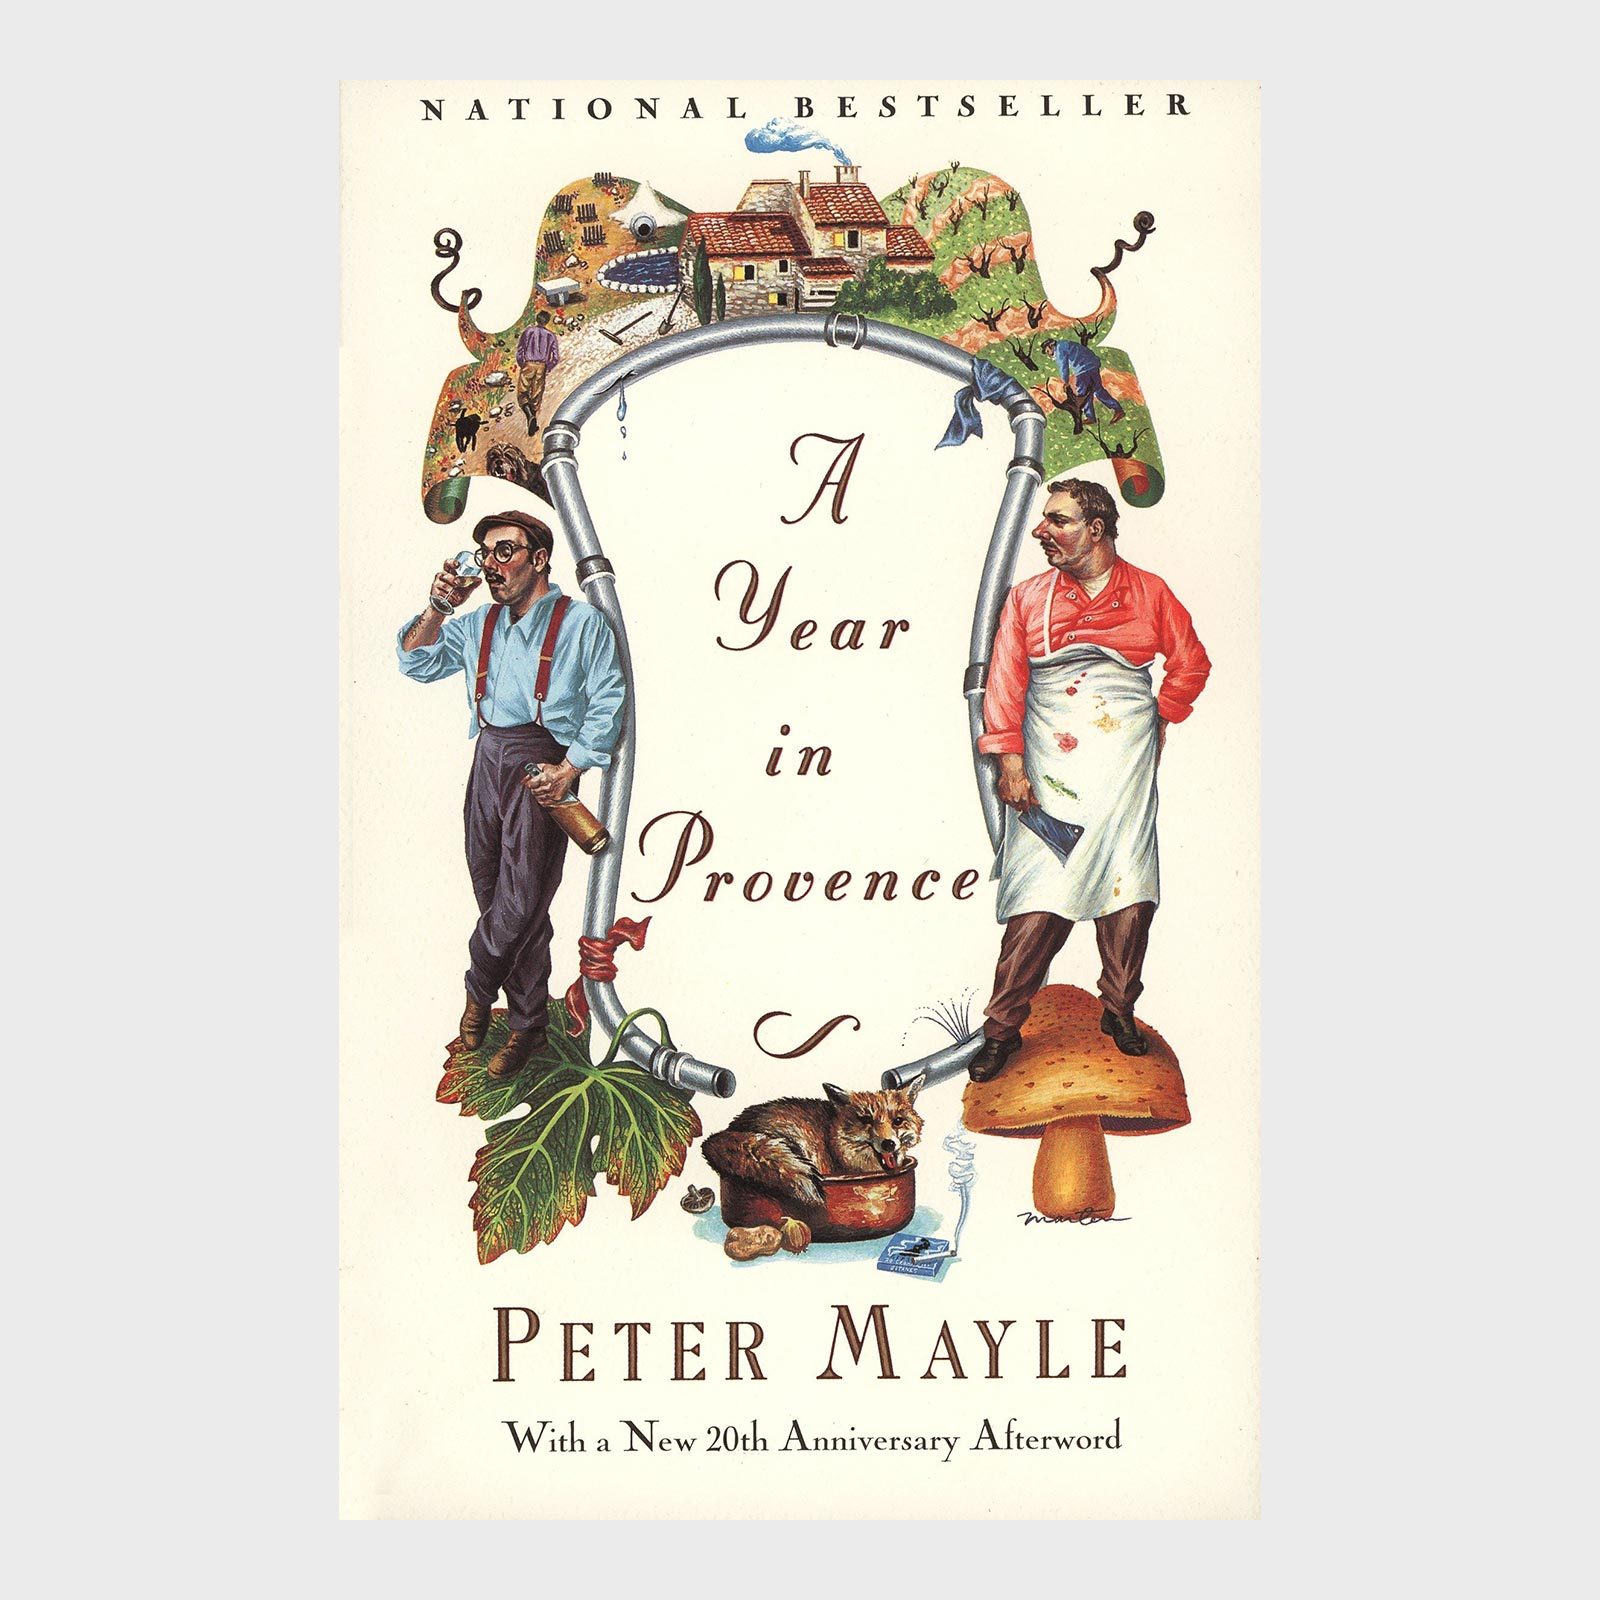 <h3><em>A Year in Provence </em>by Peter Mayle</h3> <p><strong>Setting:</strong> Provence, Southern France</p> <p>Perhaps one of the most beloved travel books since its 2010 debut, <a href="https://www.amazon.com/Year-Provence-Peter-Mayle/dp/0679731148" rel="noopener noreferrer"><em>A Year in Provence</em></a> delivers what it promises: a welcome escape to sunny, lavender-filled, Mediterranean-hugging southern France. There, steeped in the daily wonders of Provençal life, author Peter Mayle describes his experience of moving into a 200-year-old French farmhouse in a small village. This witty, easy <a href="https://www.rd.com/article/best-summer-reads/" rel="noopener noreferrer">summer read</a> is a book that even Julia Child would have approved of.</p> <p class="listicle-page__cta-button-shop"><a class="shop-btn" href="https://www.amazon.com/Year-Provence-Peter-Mayle/dp/0679731148">Shop Now</a></p> <p><span><strong>Looking for your next great book? Read four of today’s bestselling novels in the time it takes to read one with </strong><a class="fui-Link ___1qmgydl f3rmtva f1ewtqcl fyind8e f1k6fduh f1w7gpdv fk6fouc fjoy568 figsok6 f1hu3pq6 f11qmguv f19f4twv f1tyq0we f1g0x7ka fhxju0i f1qch9an f1cnd47f fqv5qza f1vmzxwi f1o700av f13mvf36 f1cmlufx f9n3di6 f1ids18y f1tx3yz7 f1deo86v f1eh06m1 f1iescvh ftqa4ok f2hkw1w fhgqx19 f1olyrje f1p93eir f1h8hb77 f1x7u7e9 f10aw75t fsle3fq" title="https://books.readersdigest.com/servlet/convertiblegateway?cds_mag_code=rdb&cds_page_id=258553&cds_response_key=1drcddu101&utm_source=direct&utm_medium=shop.rd&utm_campaign=1h6_19000100_drivetoweb&utm_placement=drivetoweb&utm_keycode=1drcddu101" href="https://books.readersdigest.com/servlet/ConvertibleGateway?cds_mag_code=RDB&cds_page_id=258553&cds_response_key=1DRCDDU101&utm_source=direct&utm_medium=shop.rd&utm_campaign=1h6_19000100_drivetoweb&utm_placement=drivetoweb&utm_keycode=1DRCDDU101" rel="noreferrer noopener"><i><strong>Reader’s Digest Select Editions</strong></i></a><strong>. And be sure to follow the </strong><a class="fui-Link ___1qmgydl f3rmtva f1ewtqcl fyind8e f1k6fduh f1w7gpdv fk6fouc fjoy568 figsok6 f1hu3pq6 f11qmguv f19f4twv f1tyq0we f1g0x7ka fhxju0i f1qch9an f1cnd47f fqv5qza f1vmzxwi f1o700av f13mvf36 f1cmlufx f9n3di6 f1ids18y f1tx3yz7 f1deo86v f1eh06m1 f1iescvh ftqa4ok f2hkw1w fhgqx19 f1olyrje f1p93eir f1h8hb77 f1x7u7e9 f10aw75t fsle3fq" title="https://www.facebook.com/selecteditions" href="https://www.facebook.com/SelectEditions" rel="noreferrer noopener"><i><strong>Select Editions</strong></i><strong> page on Facebook</strong></a><strong>!</strong></span></p>